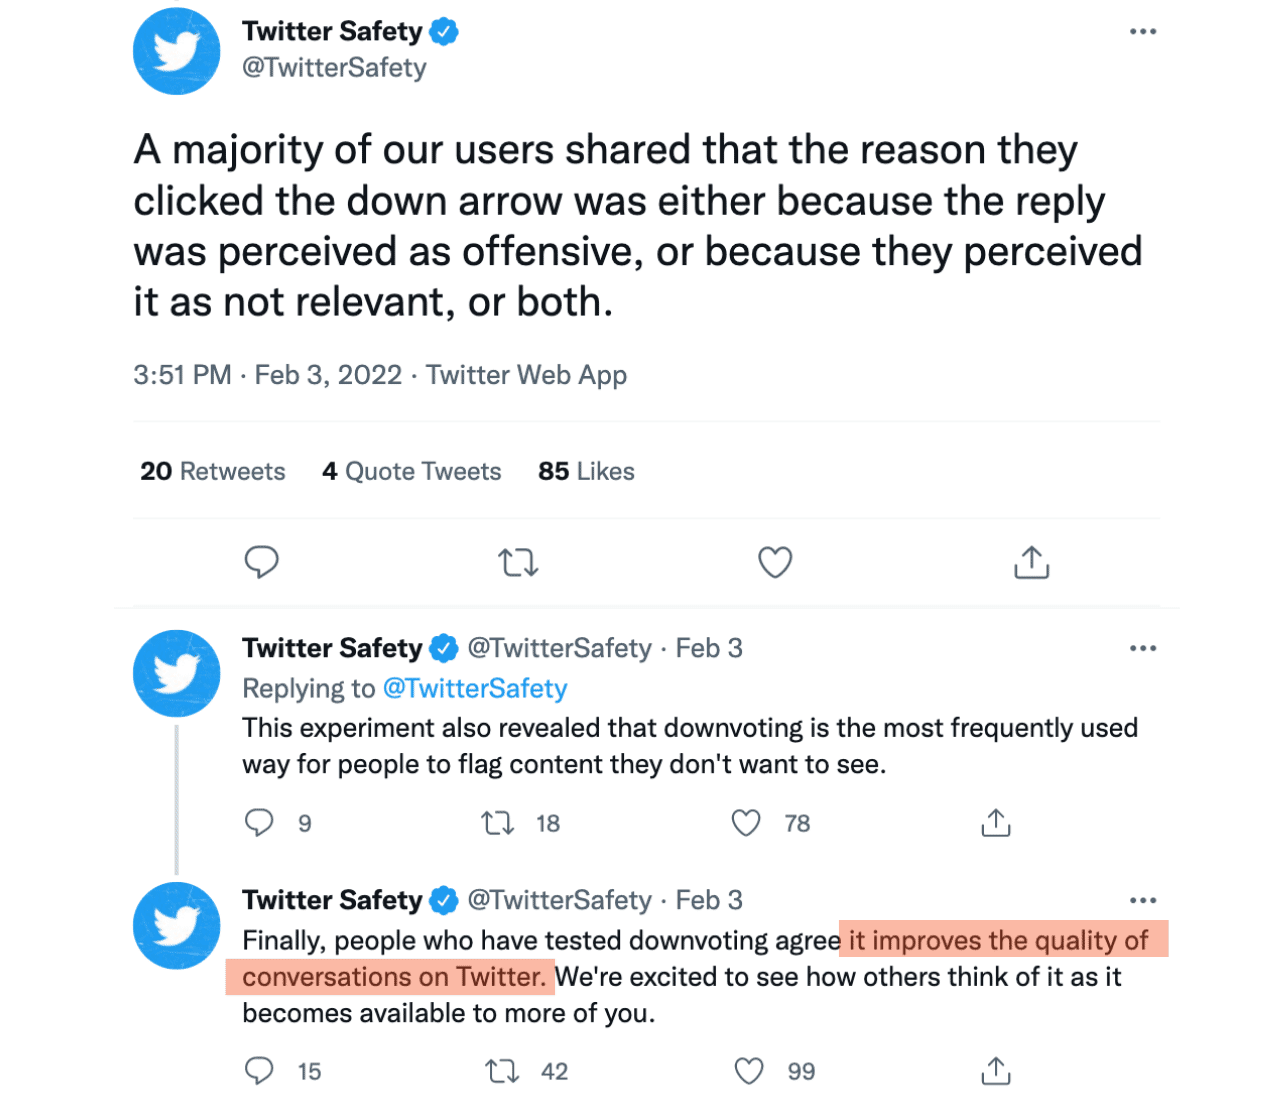 A TwitterSafety thread from February 3, 2022 reads: A majority of our users shared that the reason they clicked the down arrow was either because the reply was perceived as offensive, or because they perceived it as not relevant, or both. This experiment also revealed that downvoting is the most frequently used way for people to flag content they don't want to see. Finally, people who have tested downvoting agree it improves the quality of conversations on Twitter. We're excited to see how others think of it as it becomes available to more of you.